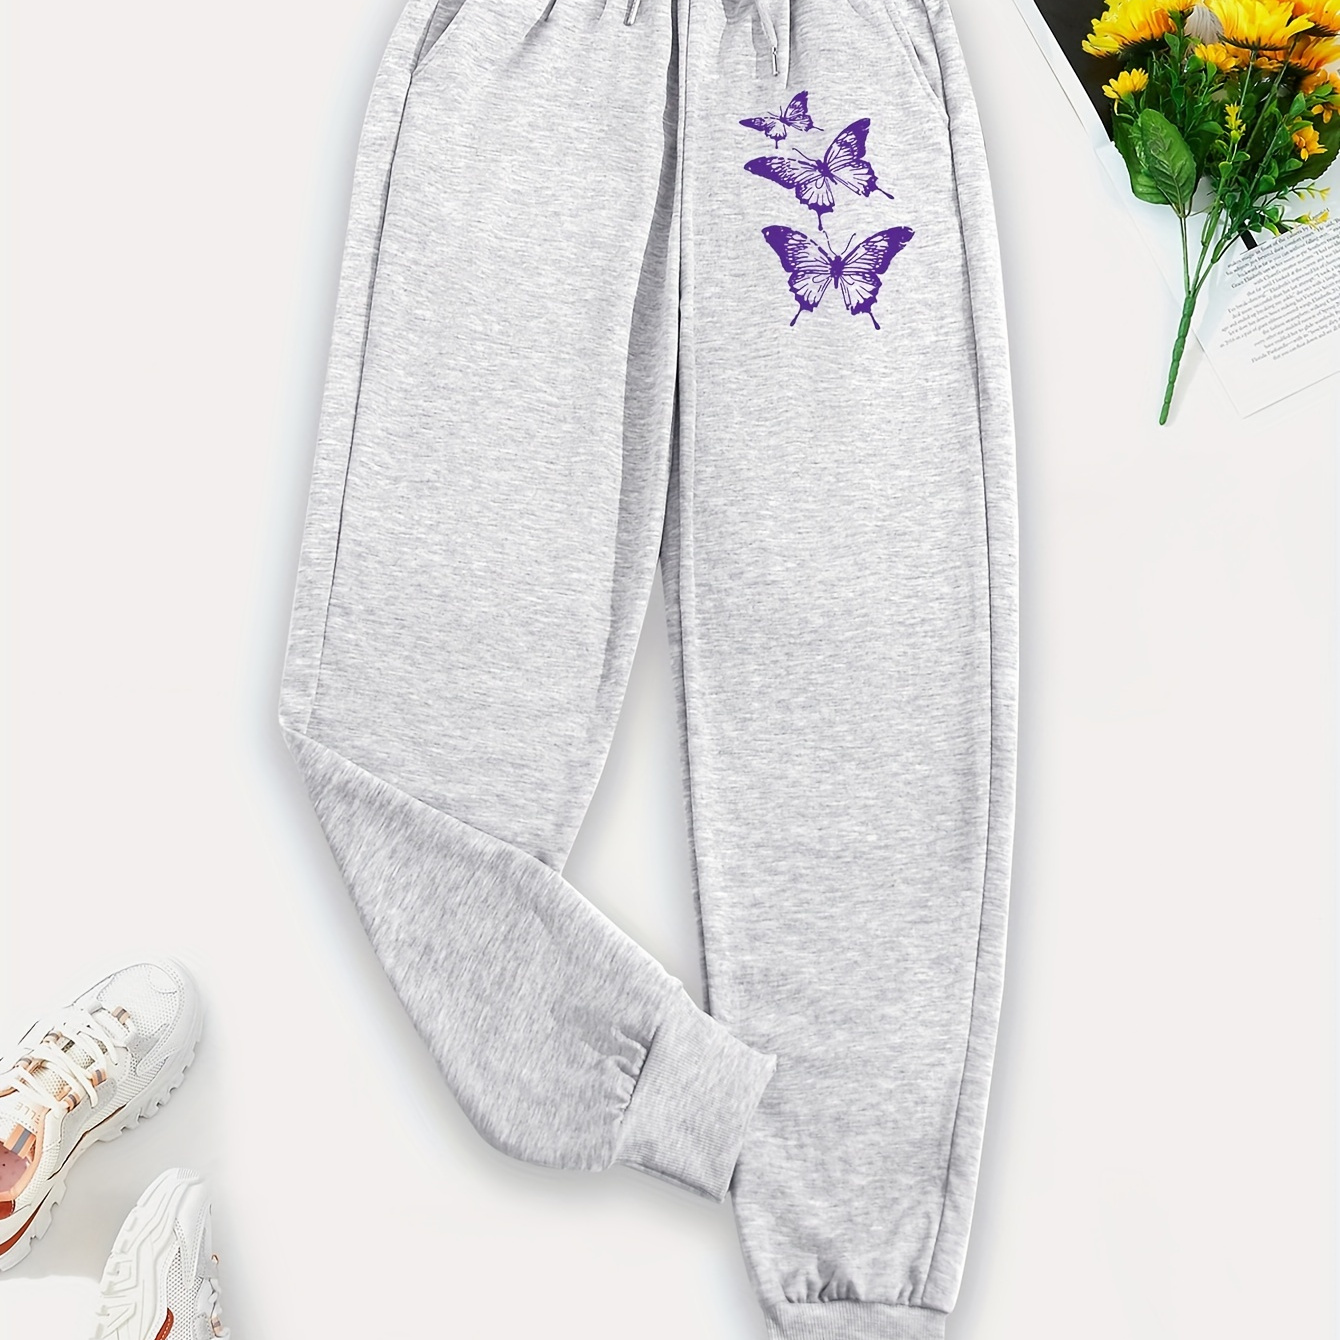 

Butterfly Print Jogger Sweatpants, Casual Drawstring Sporty Pants With Pocket, Women's Clothing